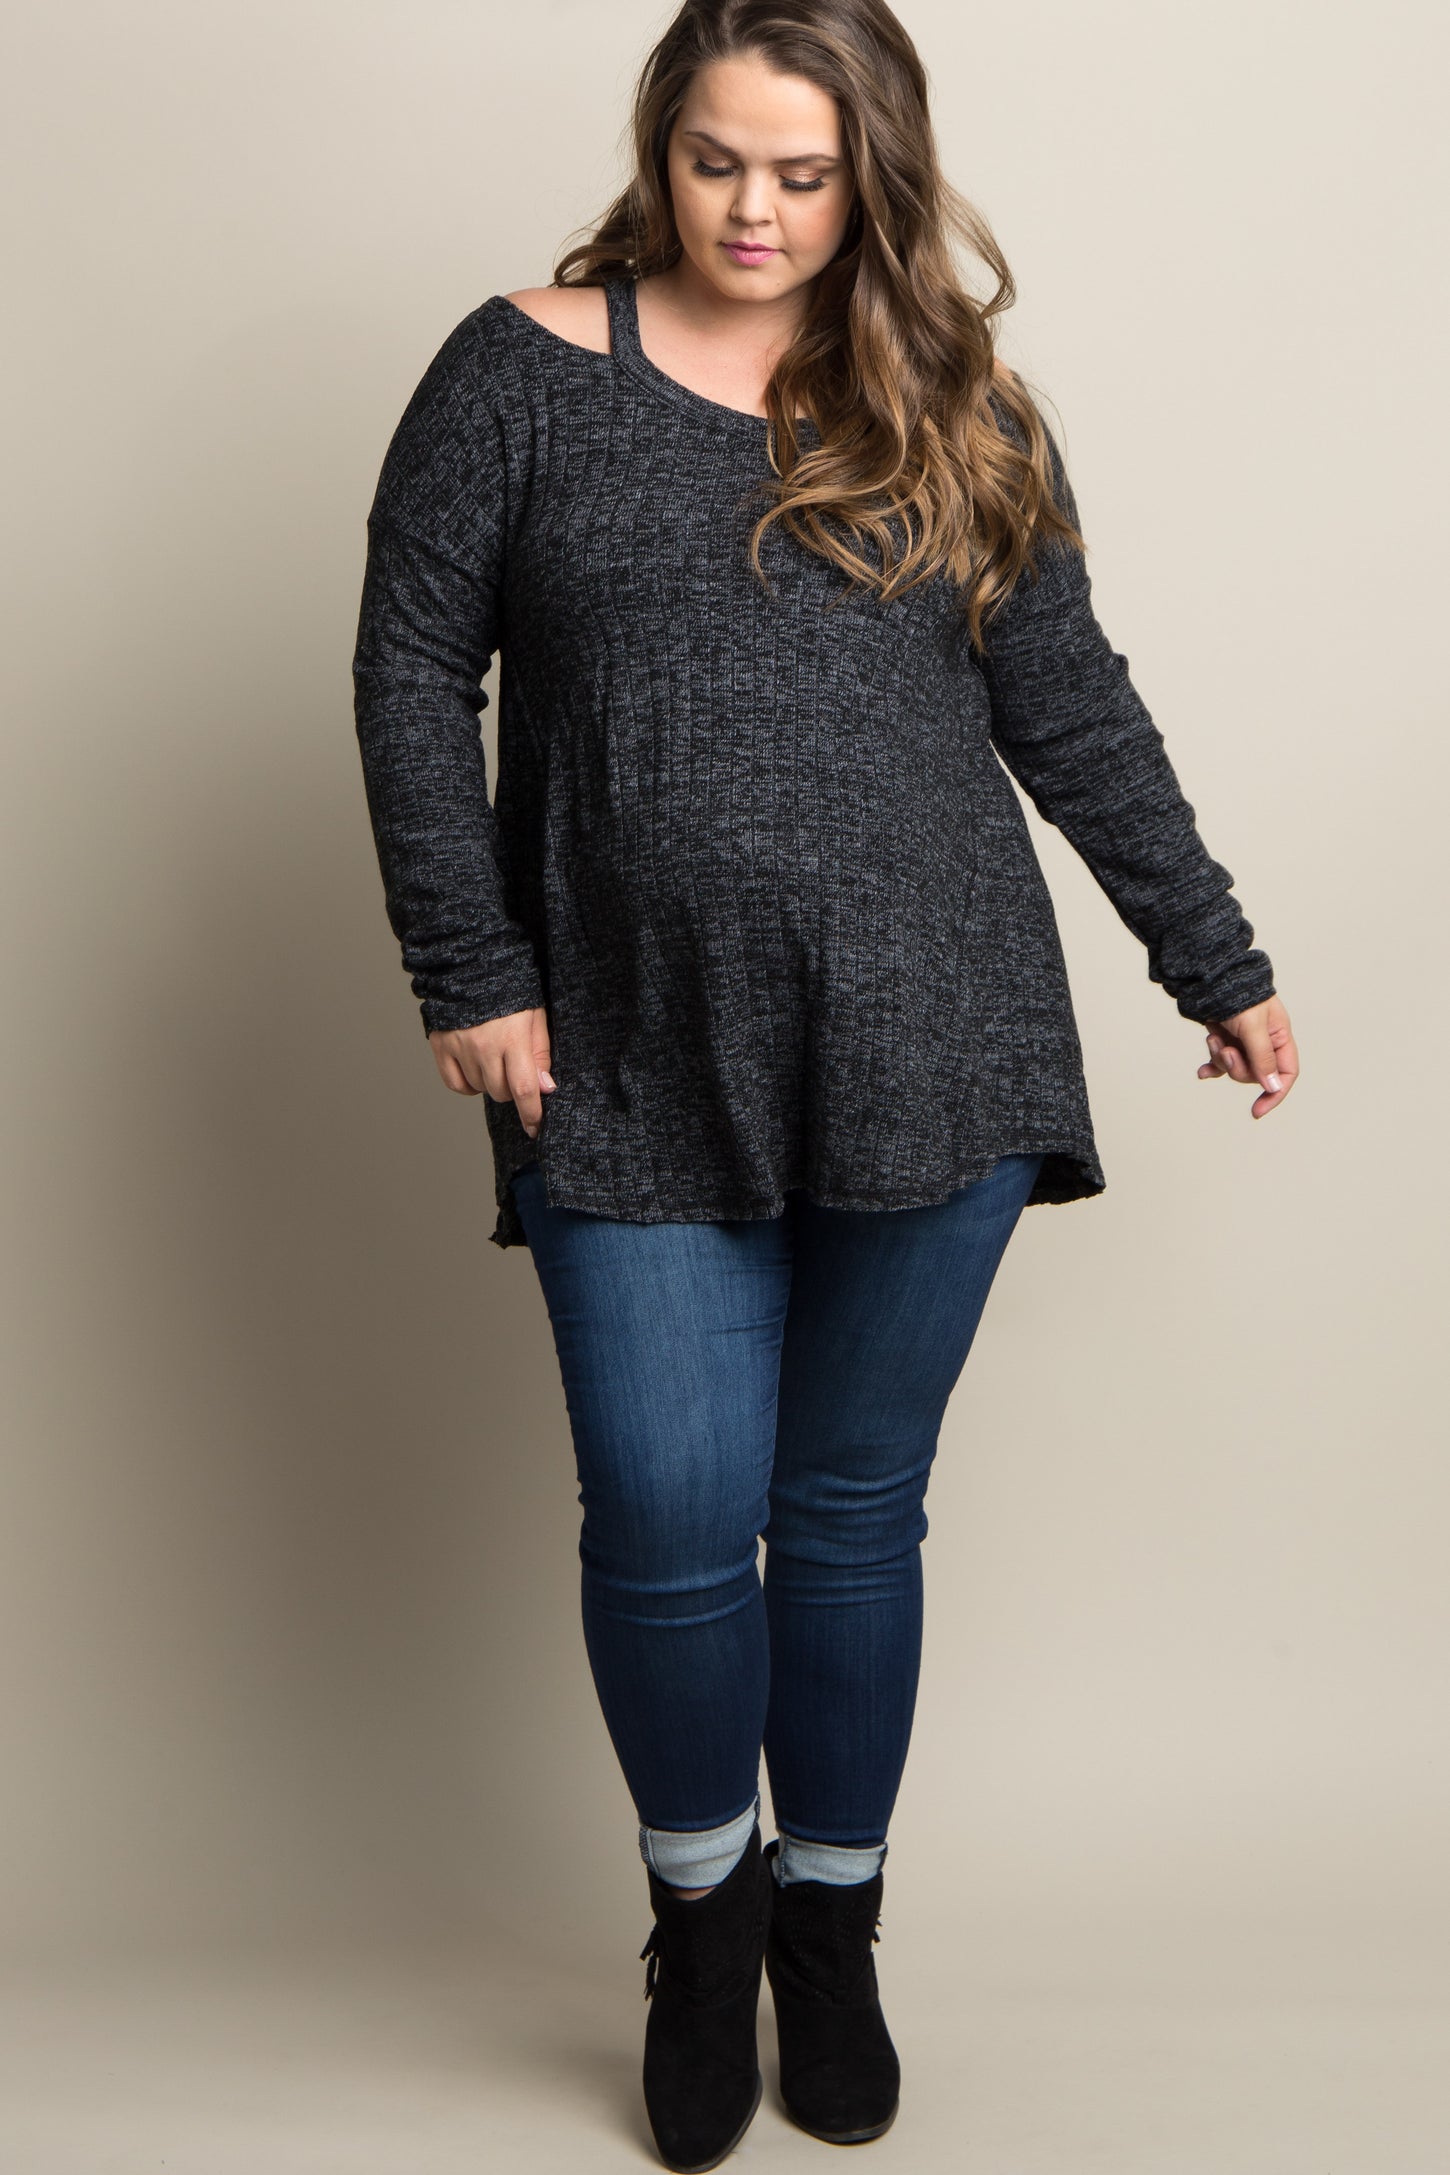 Charcoal Grey Cold Shoulder Knit Plus Maternity Top